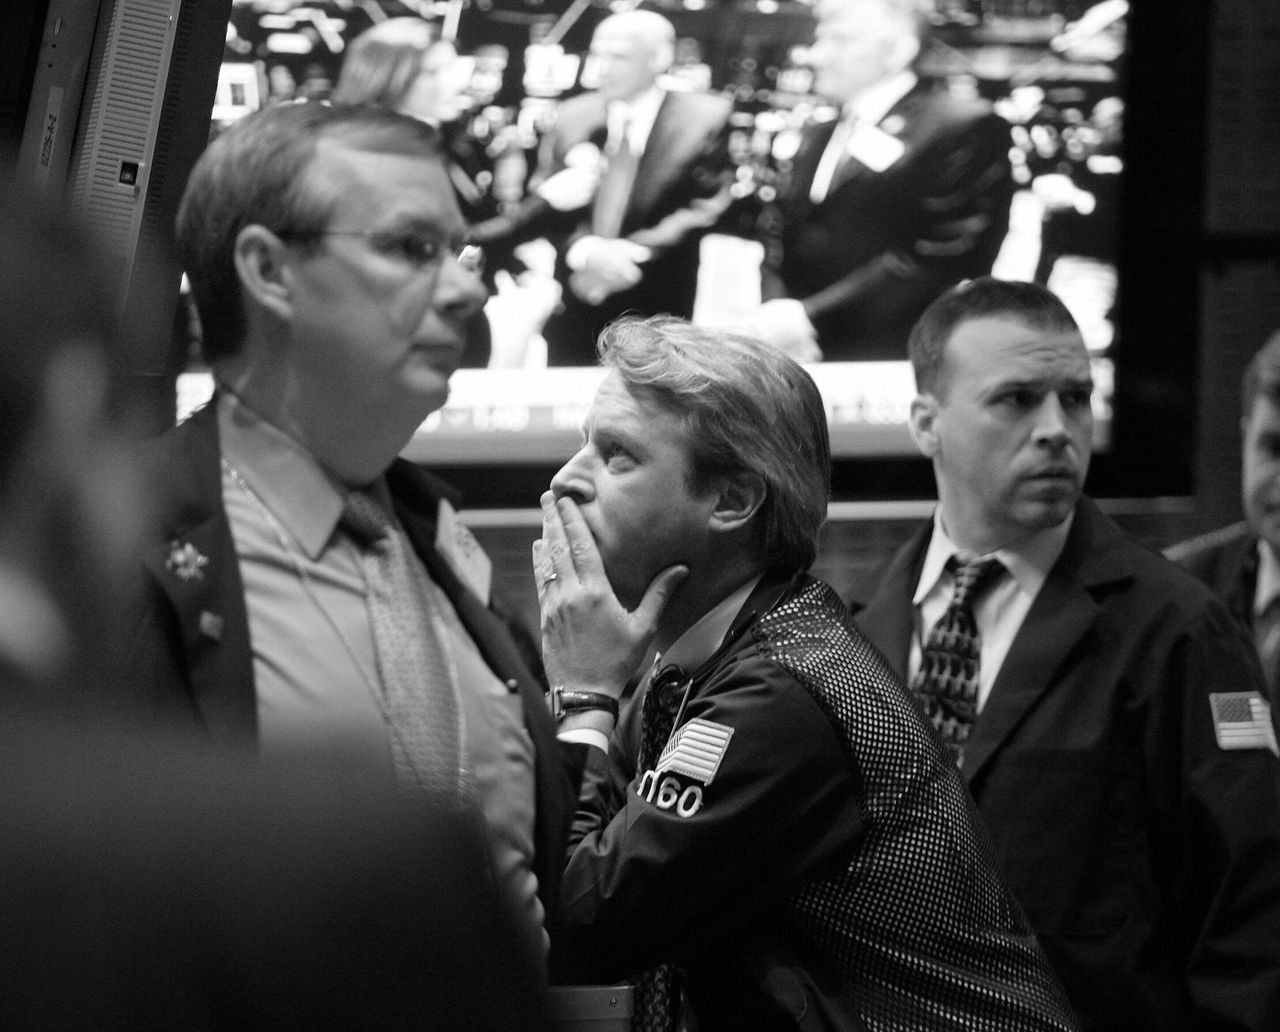 Traders watch the morning board as Secretary of the Treasury Henry Paulson visits the New York Stock Exchange trading floor with NYSE Euronext CEO Duncan L. Niederauer on Jan. 8, 2008.